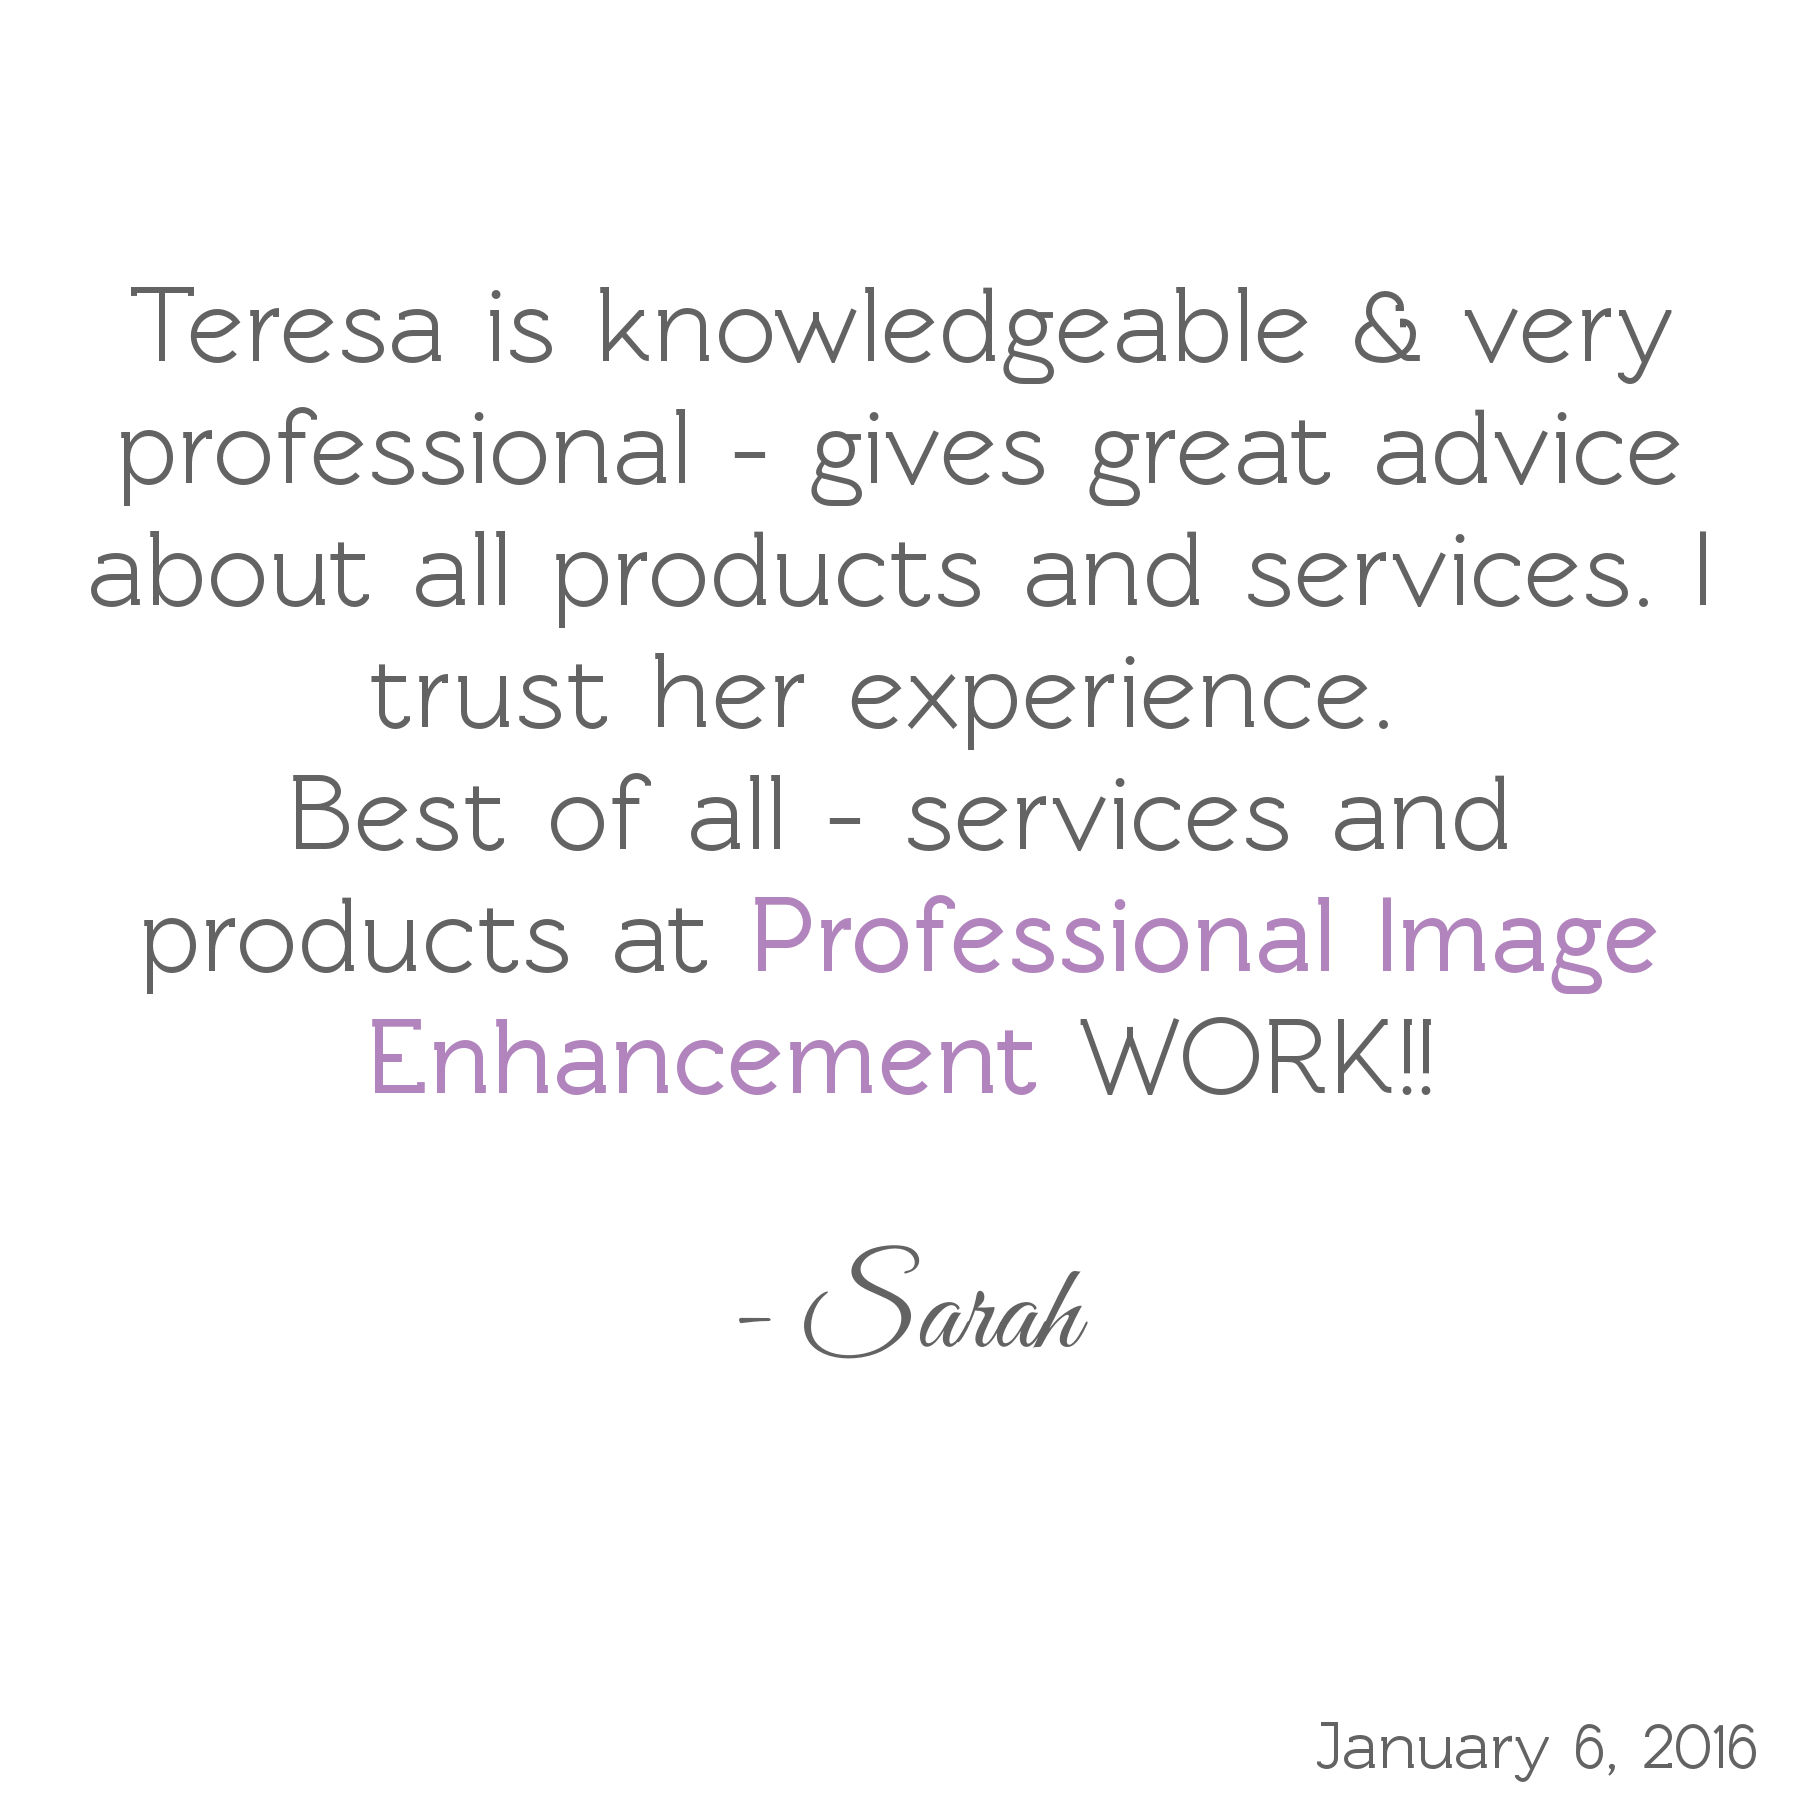 Teresa is knowledgeable & very professional - gives great advice about all products & services. I trust her experience. Best of all, services & products at Professional Image Enhancement WORK! -Sarah